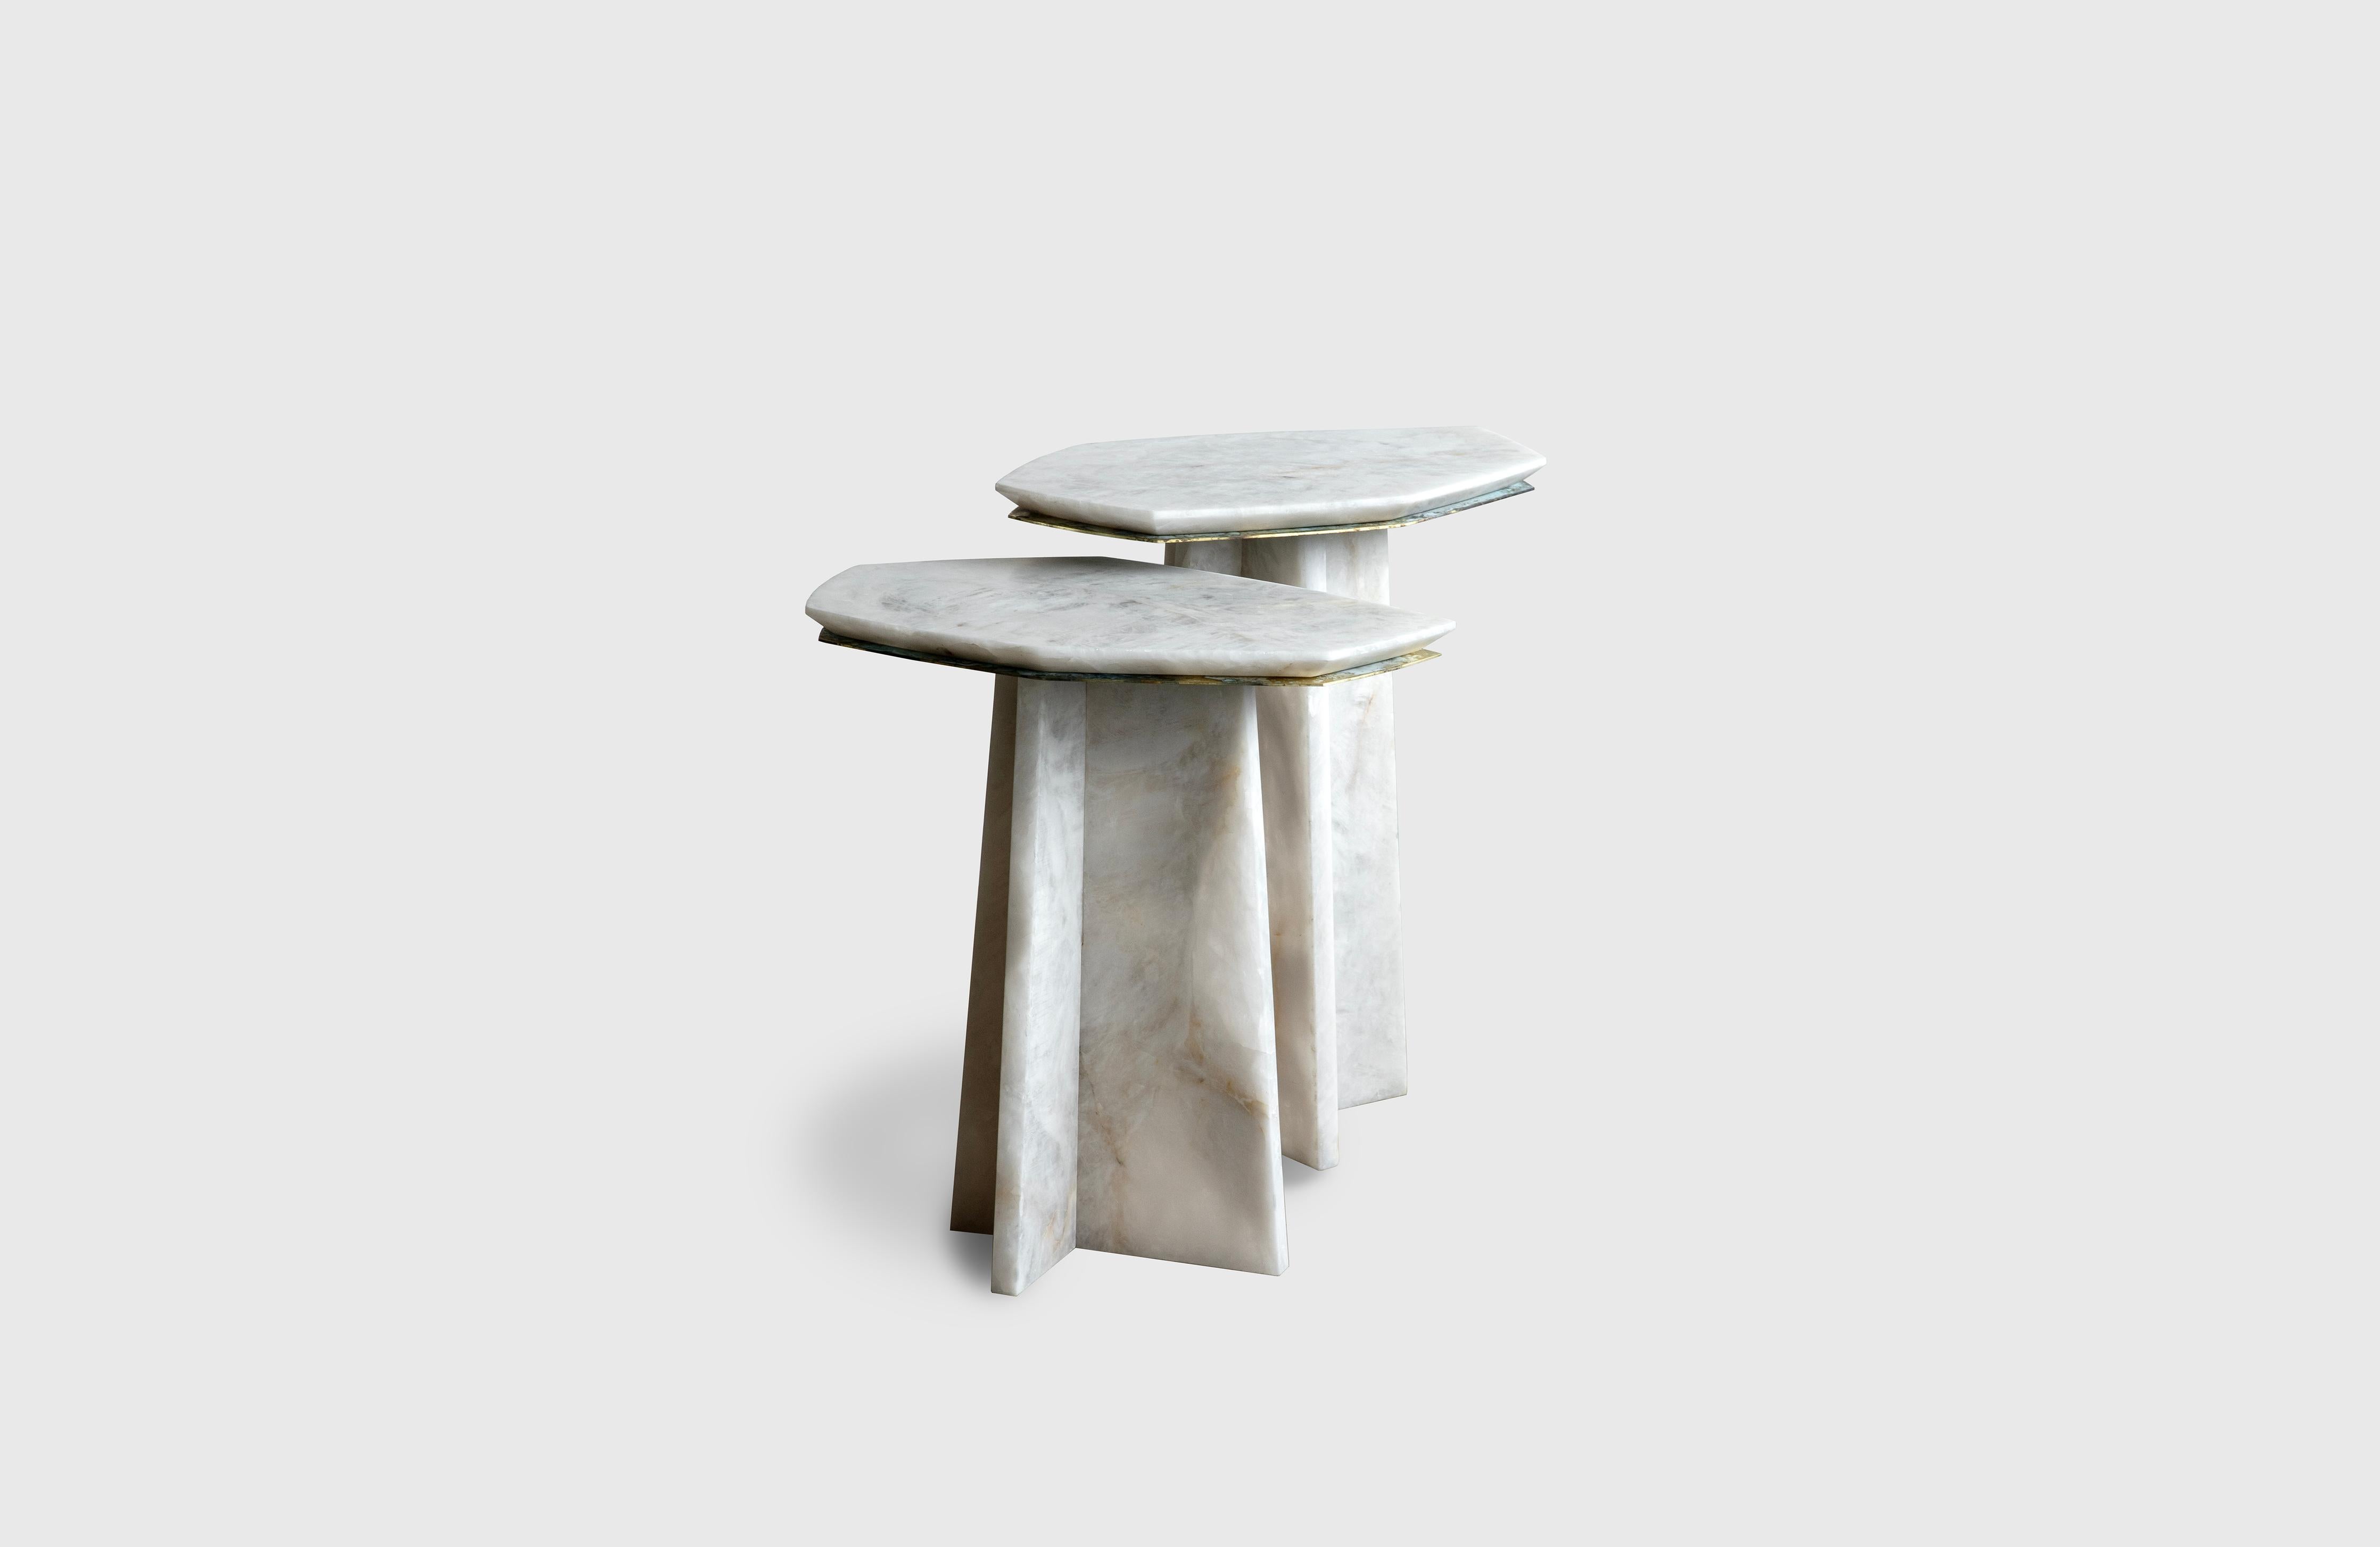 Small Geometrik Cantilever coffee table by Atra Design
Dimensions: D 50 x W 36.6 x H 48 cm
Materials: Marble, Brass
Also available in different stones: Calacatta Viola, Rhino Quartz, Calacata Gold. 
Available in other size: H 53 cm.

Atra